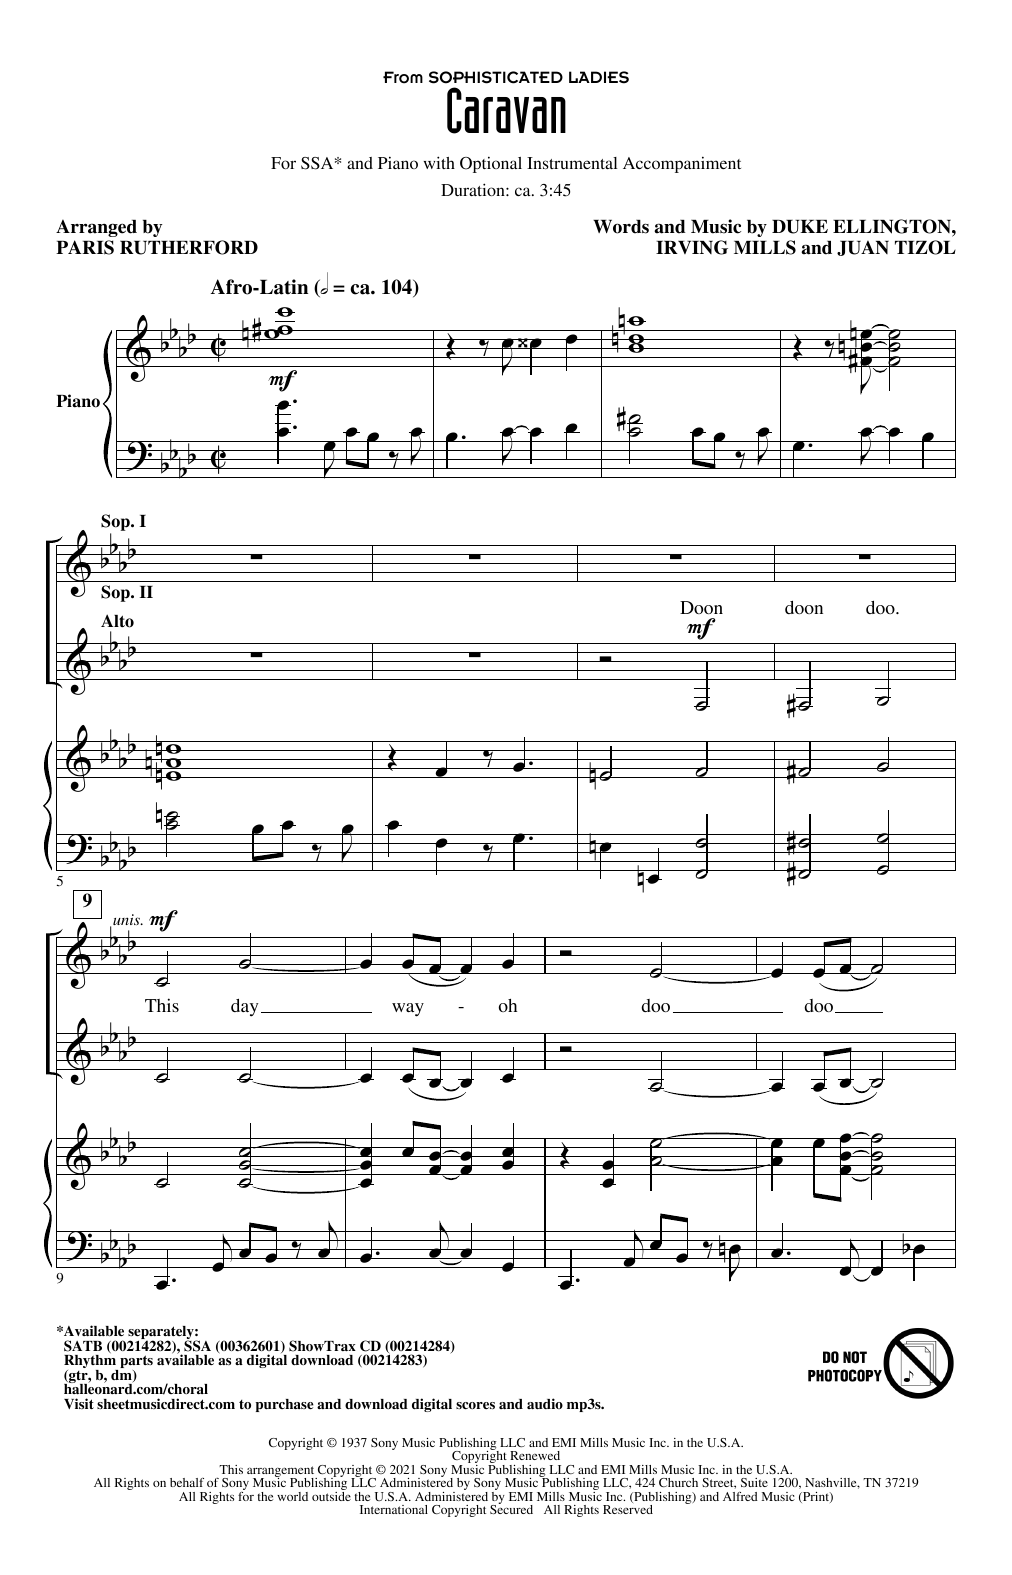 Duke Ellington and his Orchestra Caravan (from Sophisticated Ladies) (arr. Paris Rutherford) sheet music notes and chords arranged for SSA Choir